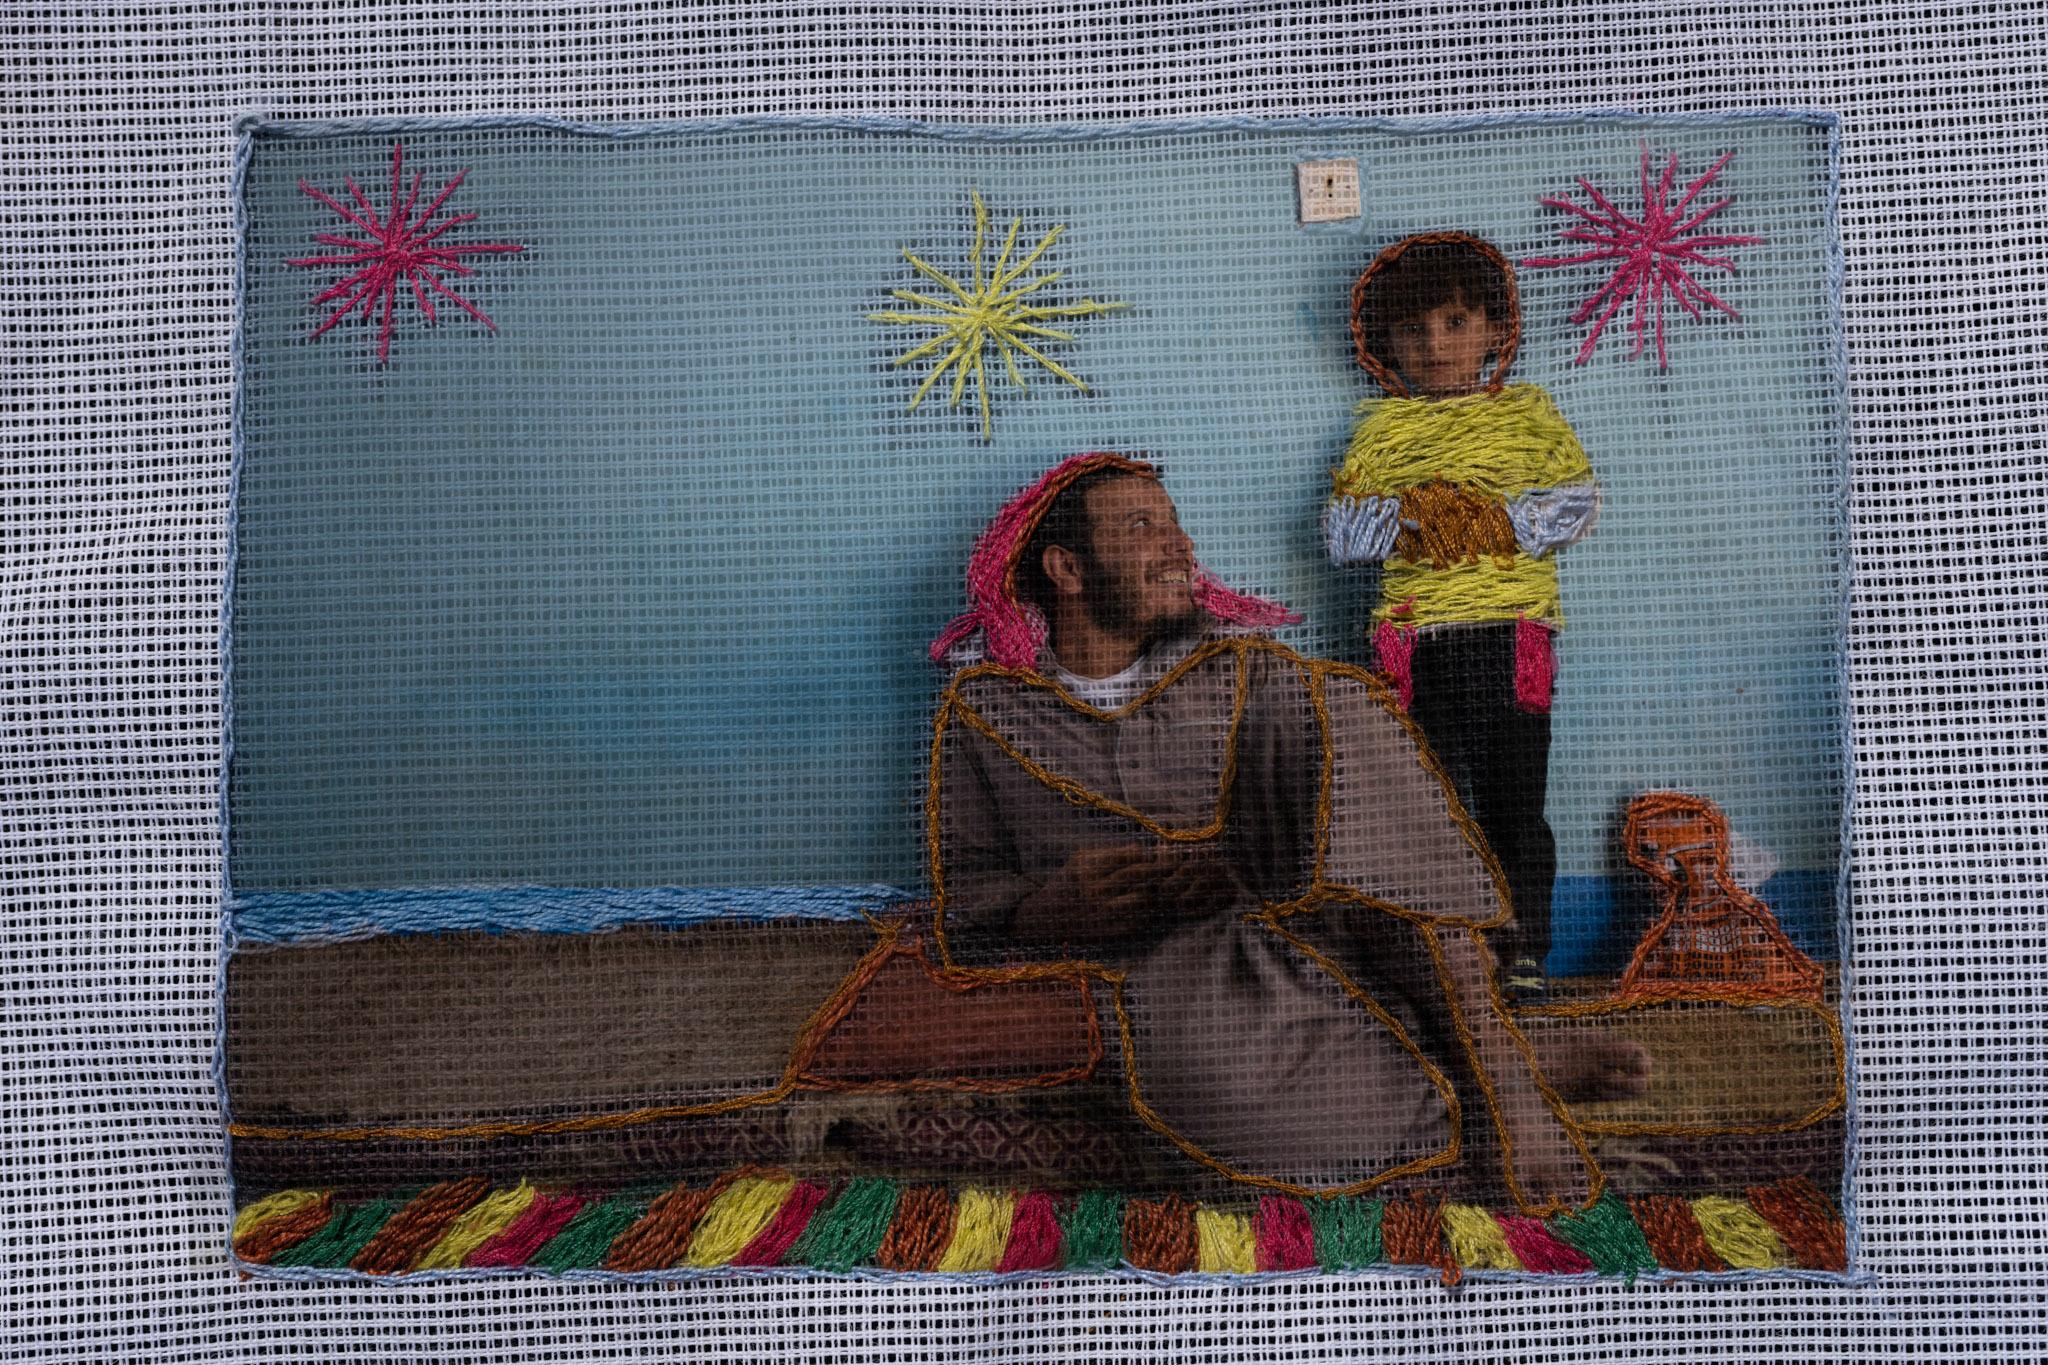 On National Geographic: In one of Egypt's most spiritual places, Bedouins find peace and resilience - An embroidered photograph by Nora Oum Jamil of her husband Ashraf and her youngest son Jamil in...